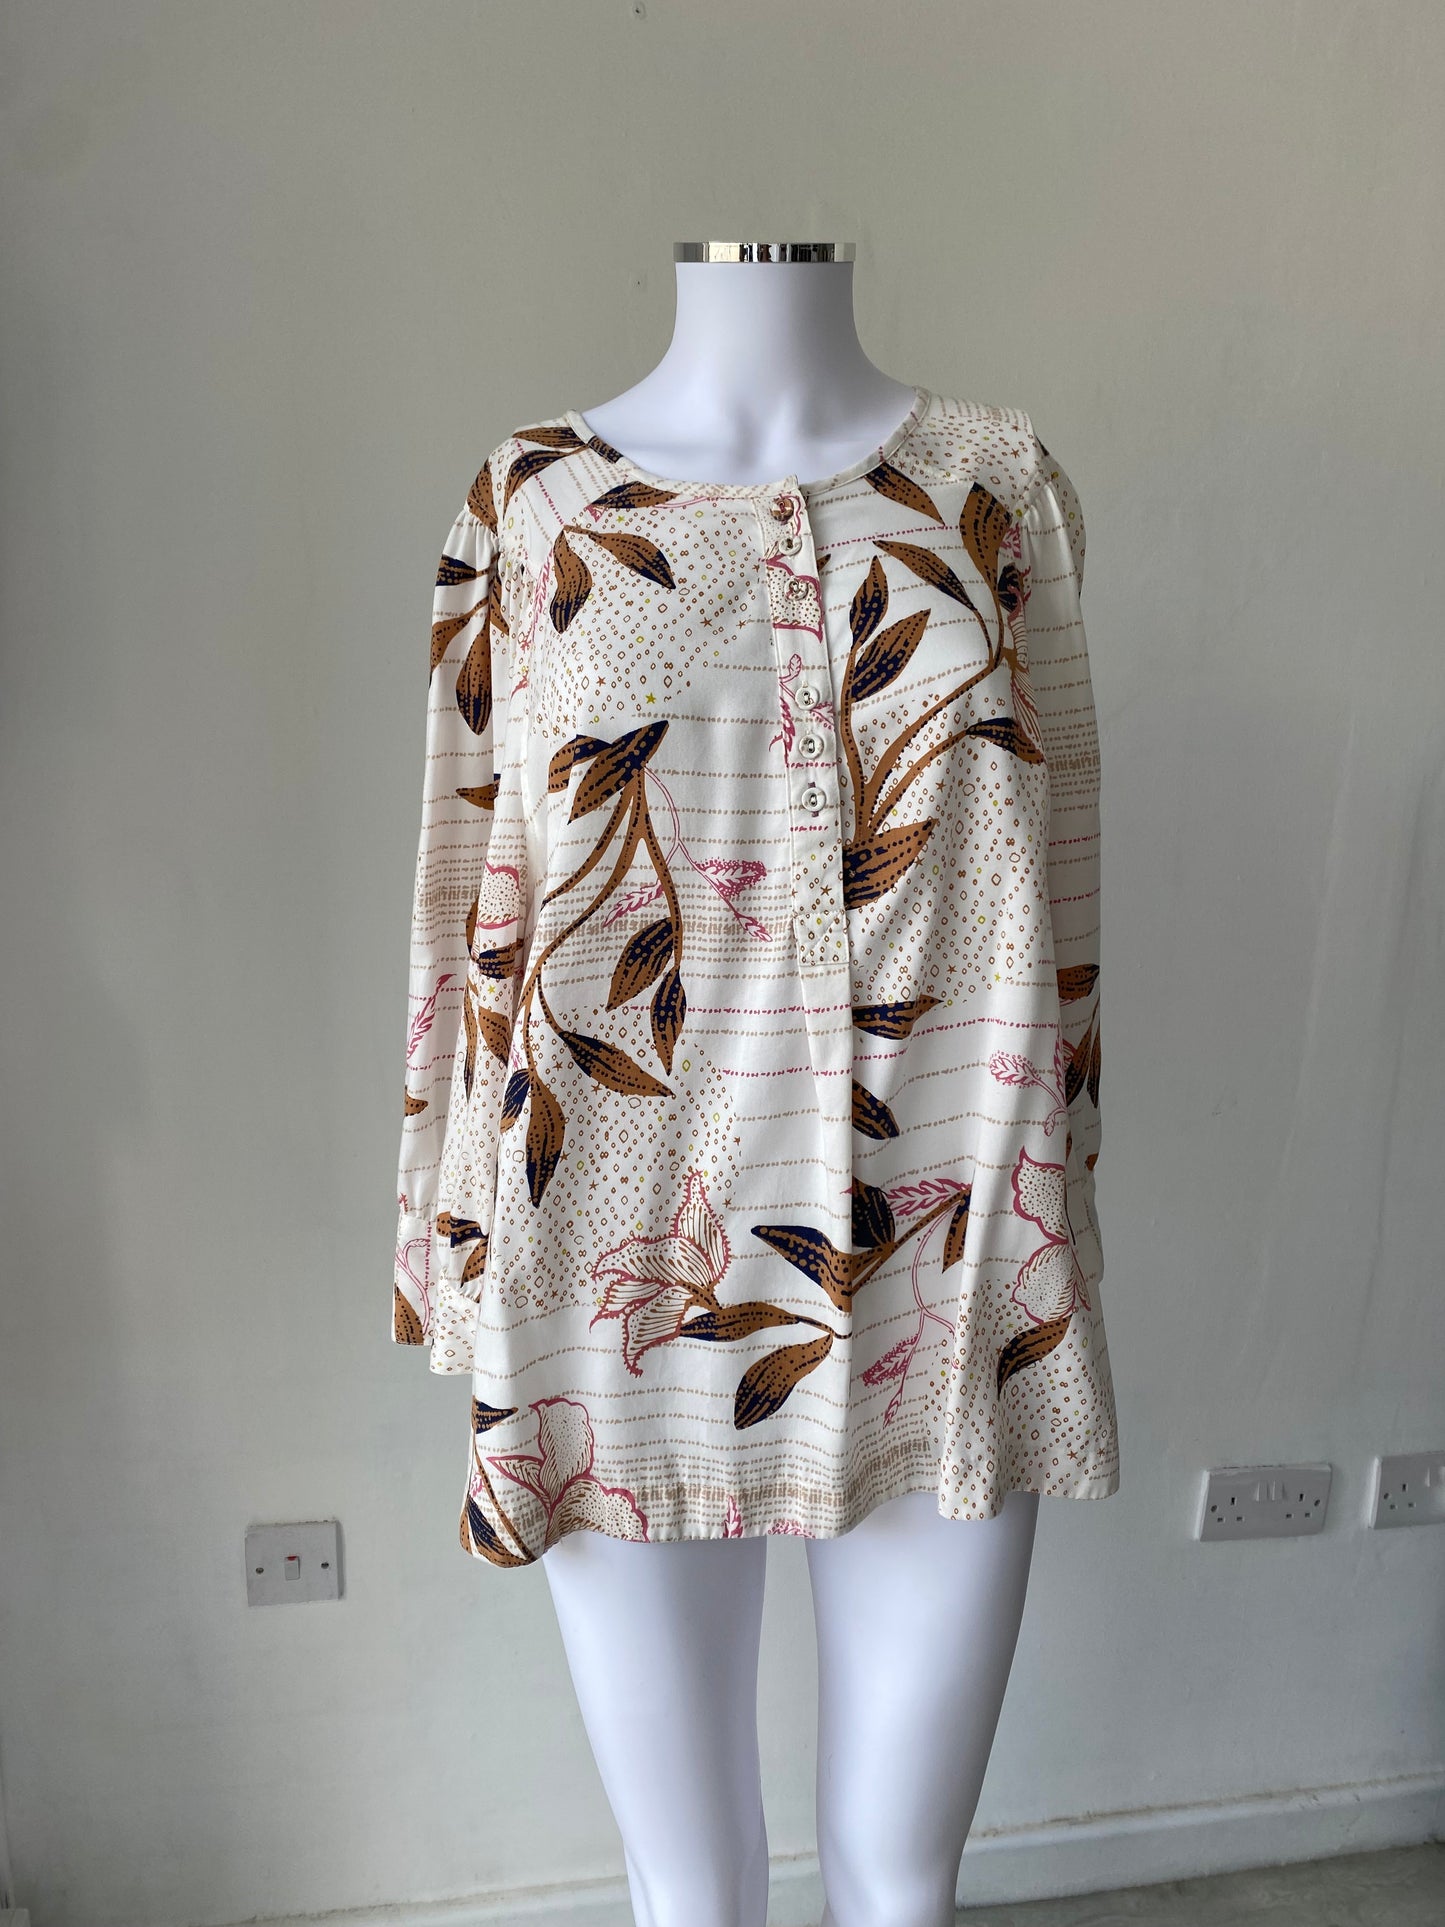 White Stuff Long Sleeved Top Size 14